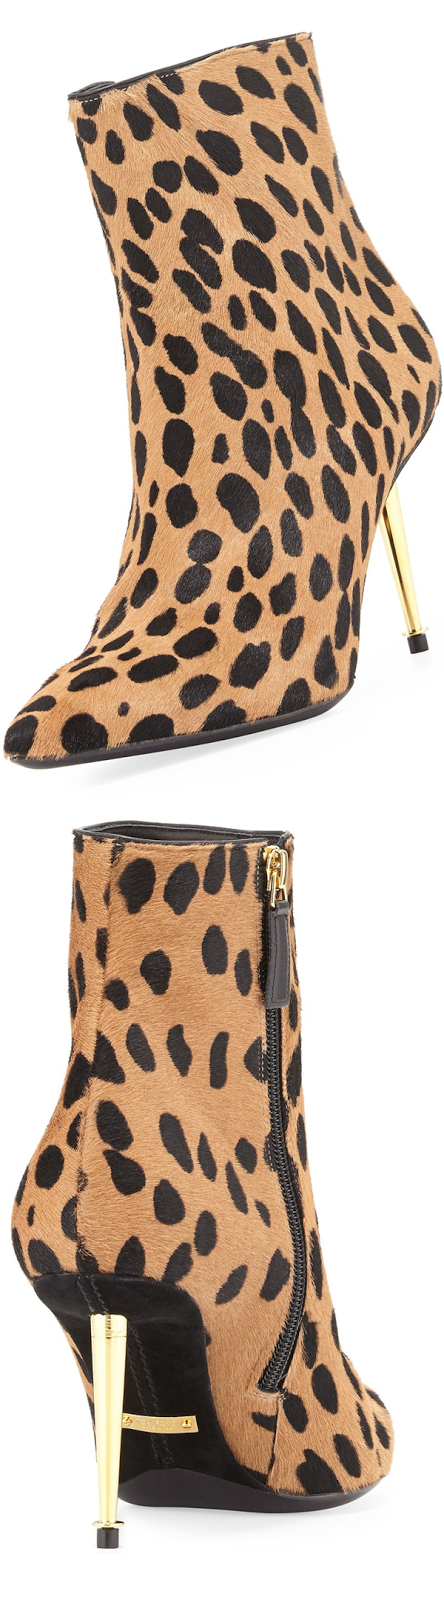 Tom Ford Leopard-Print Goat Hair Bootie